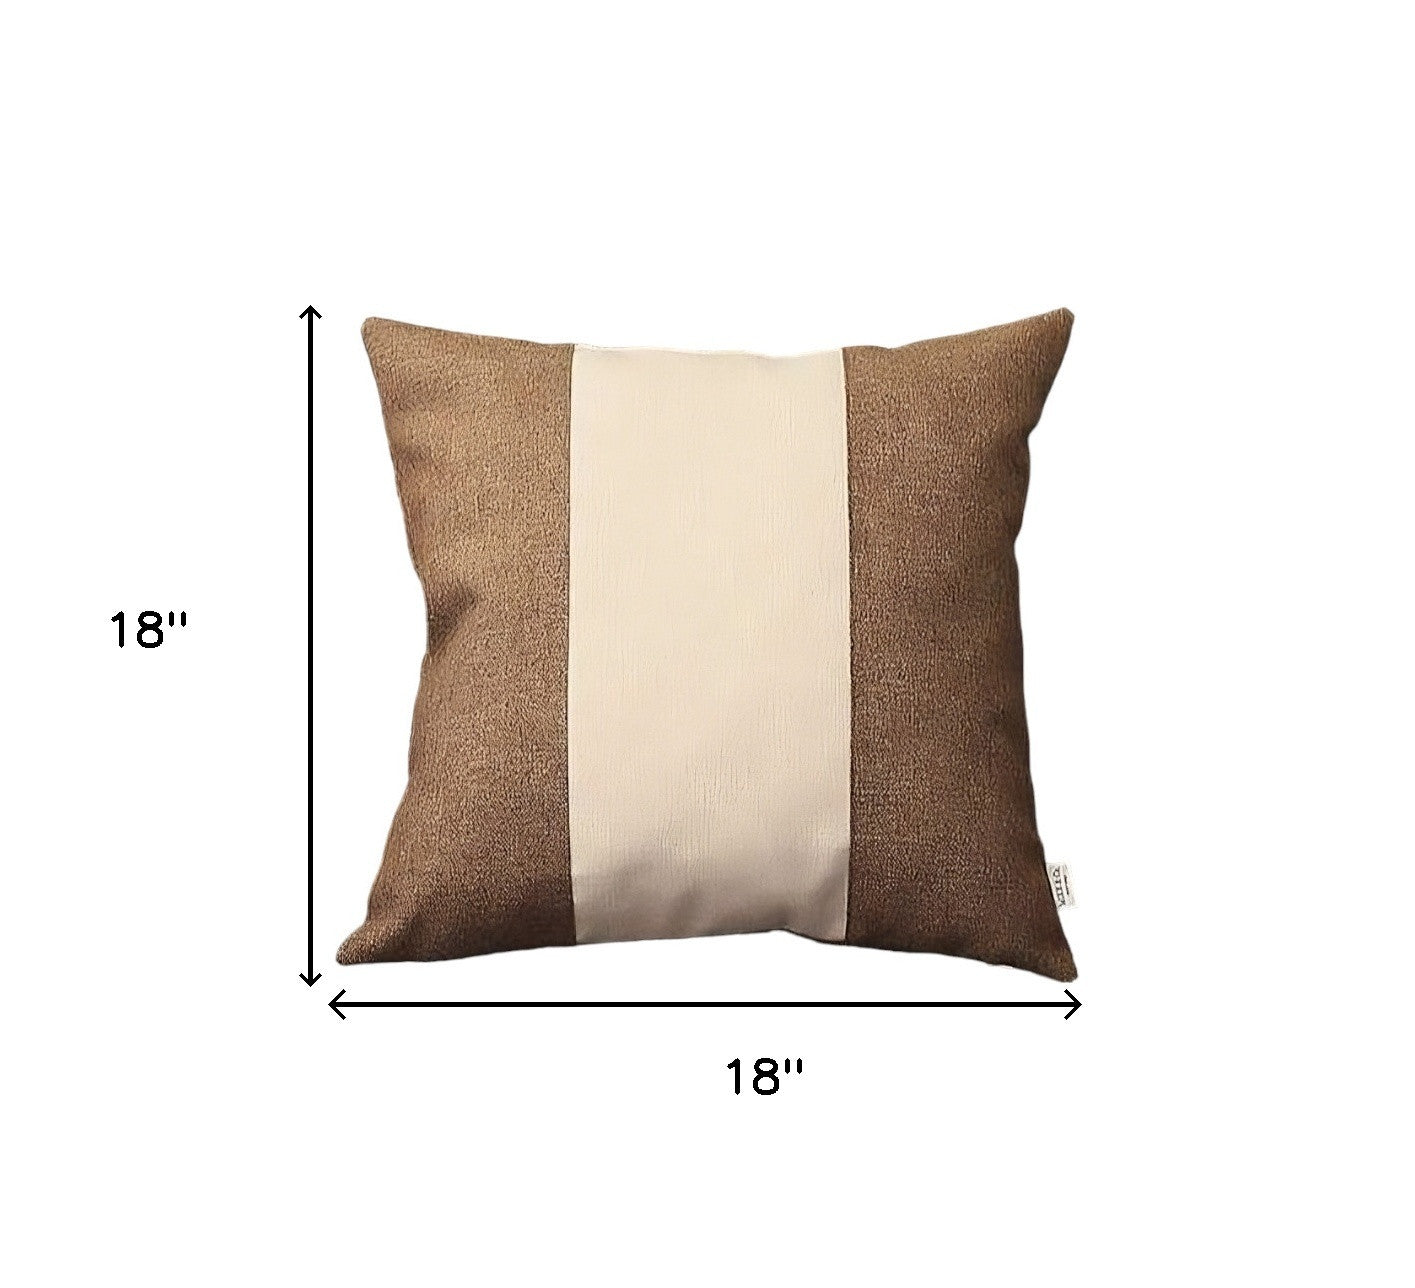 Set Of 4 Brown And White Center Pillow Covers